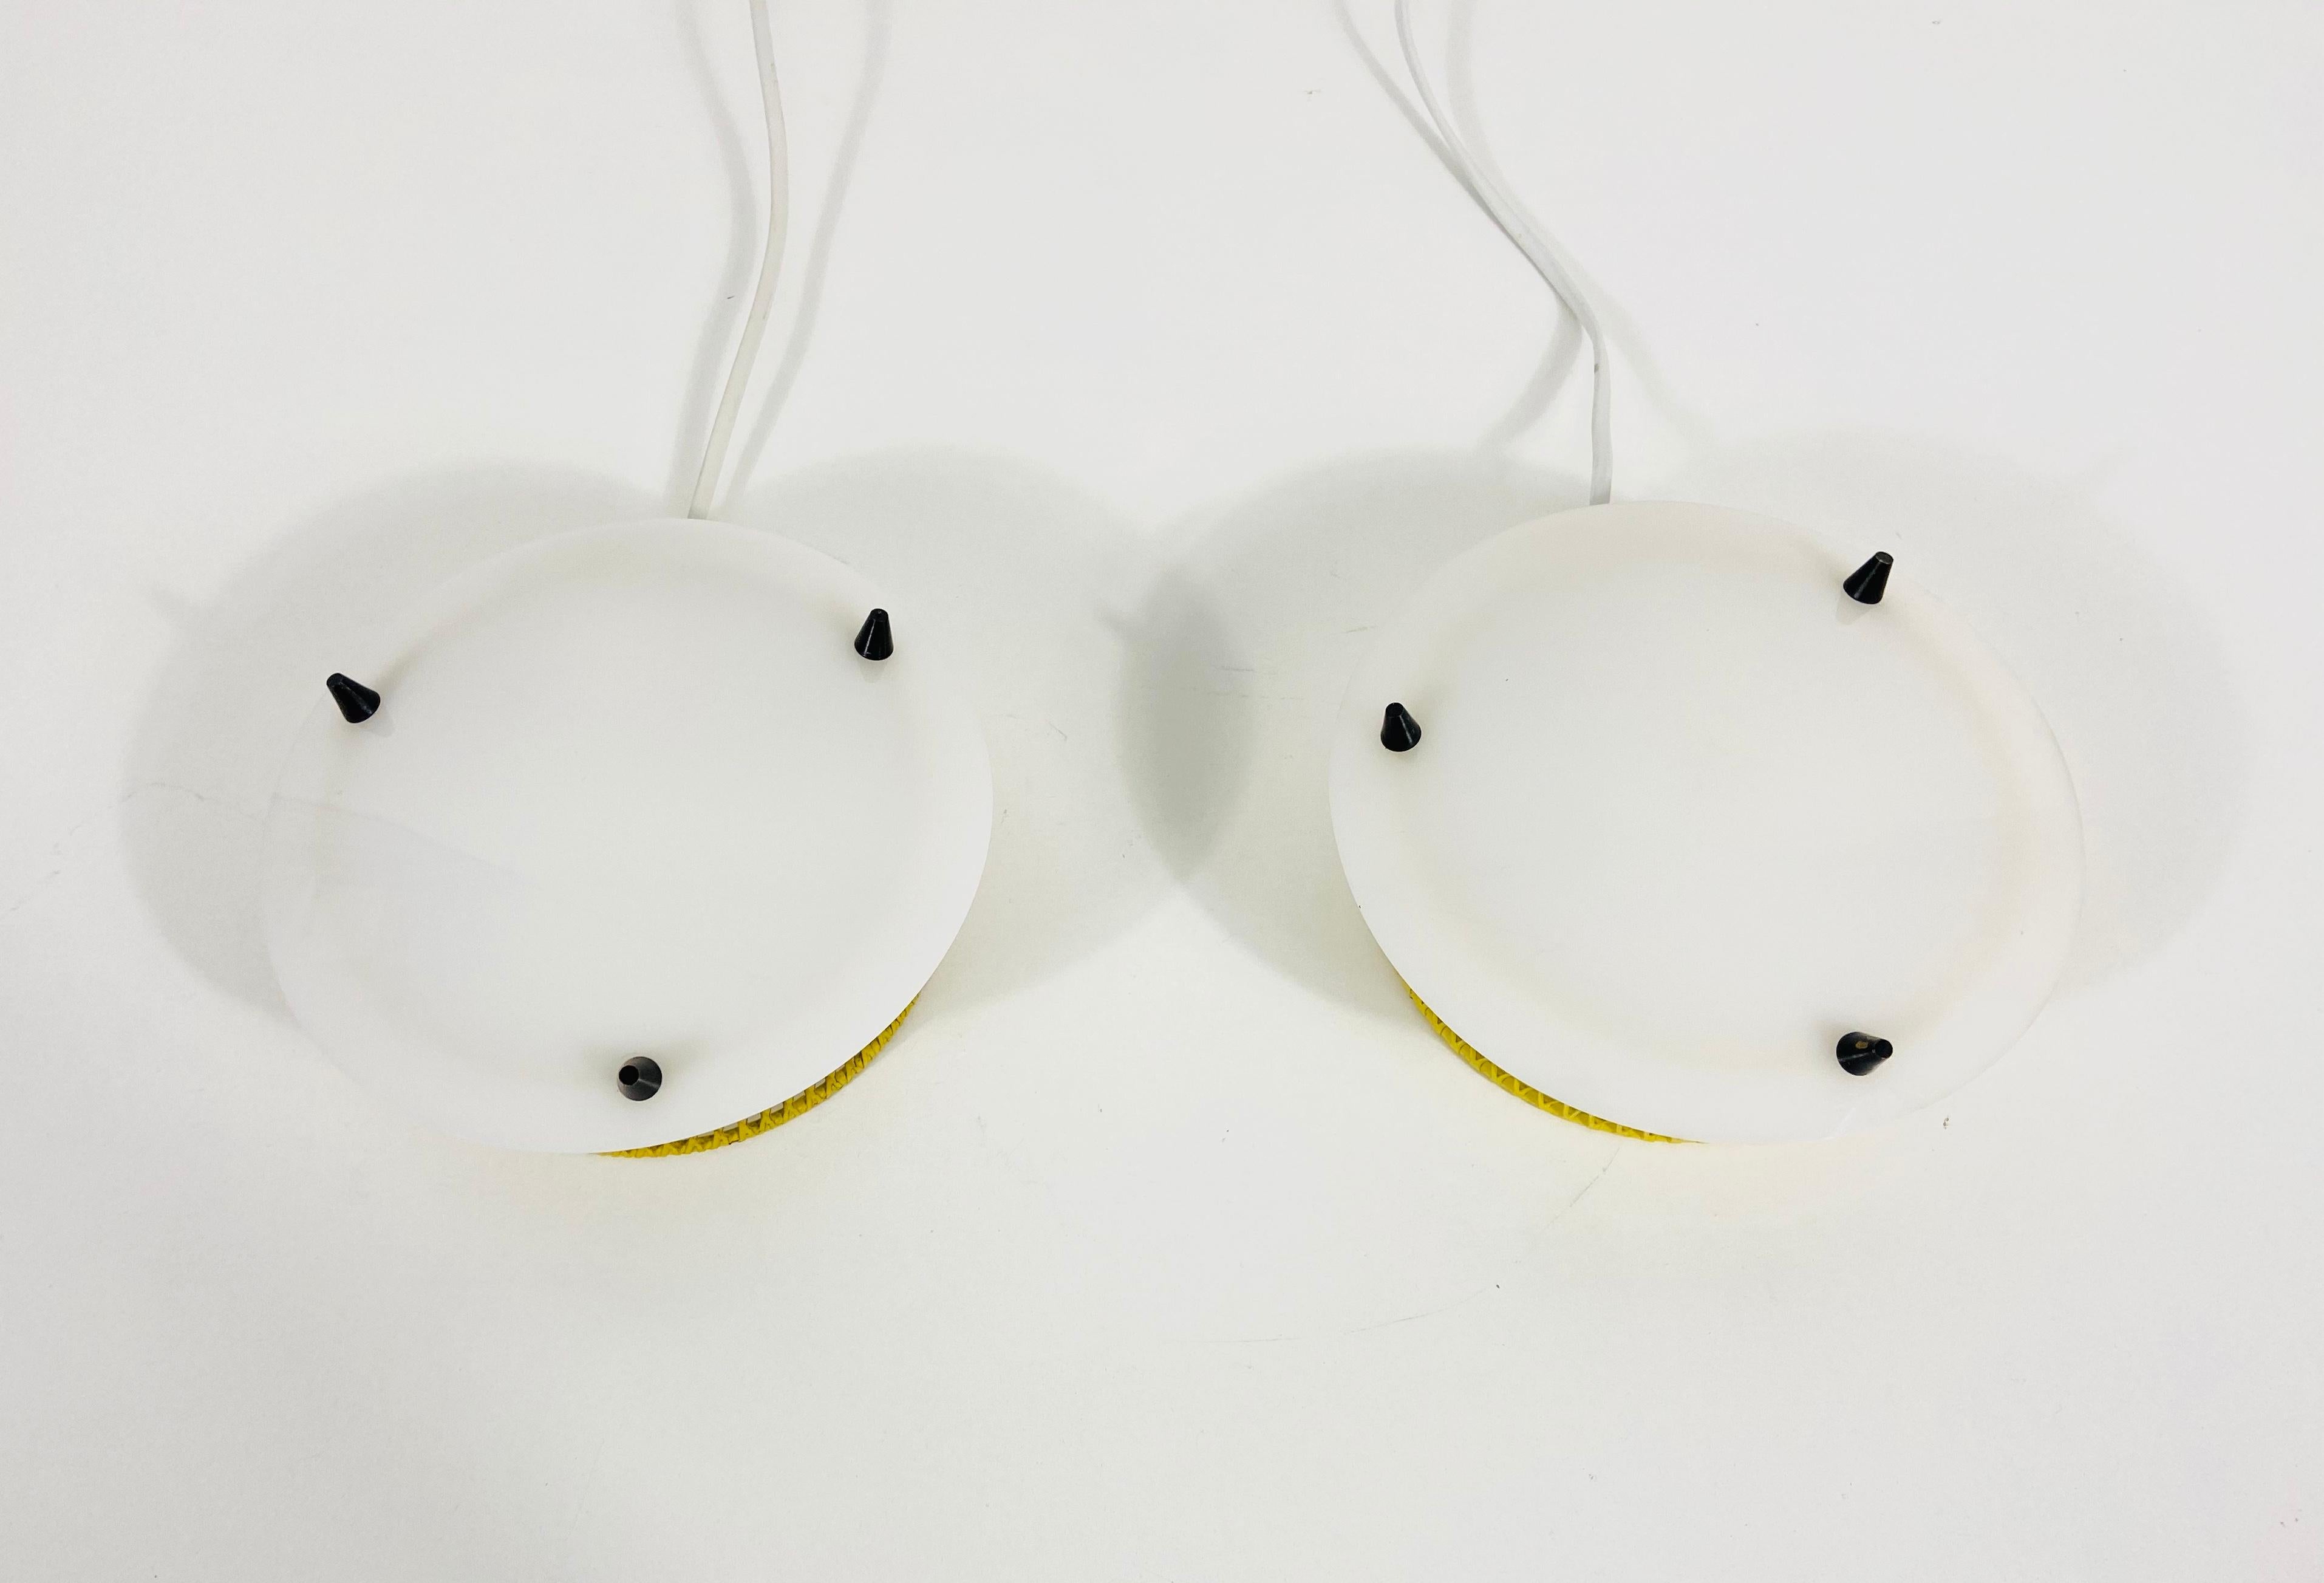 European Beautiful Mid-Century Modern Pair of Sputnik Wall Lamps, 1960s, Germany For Sale